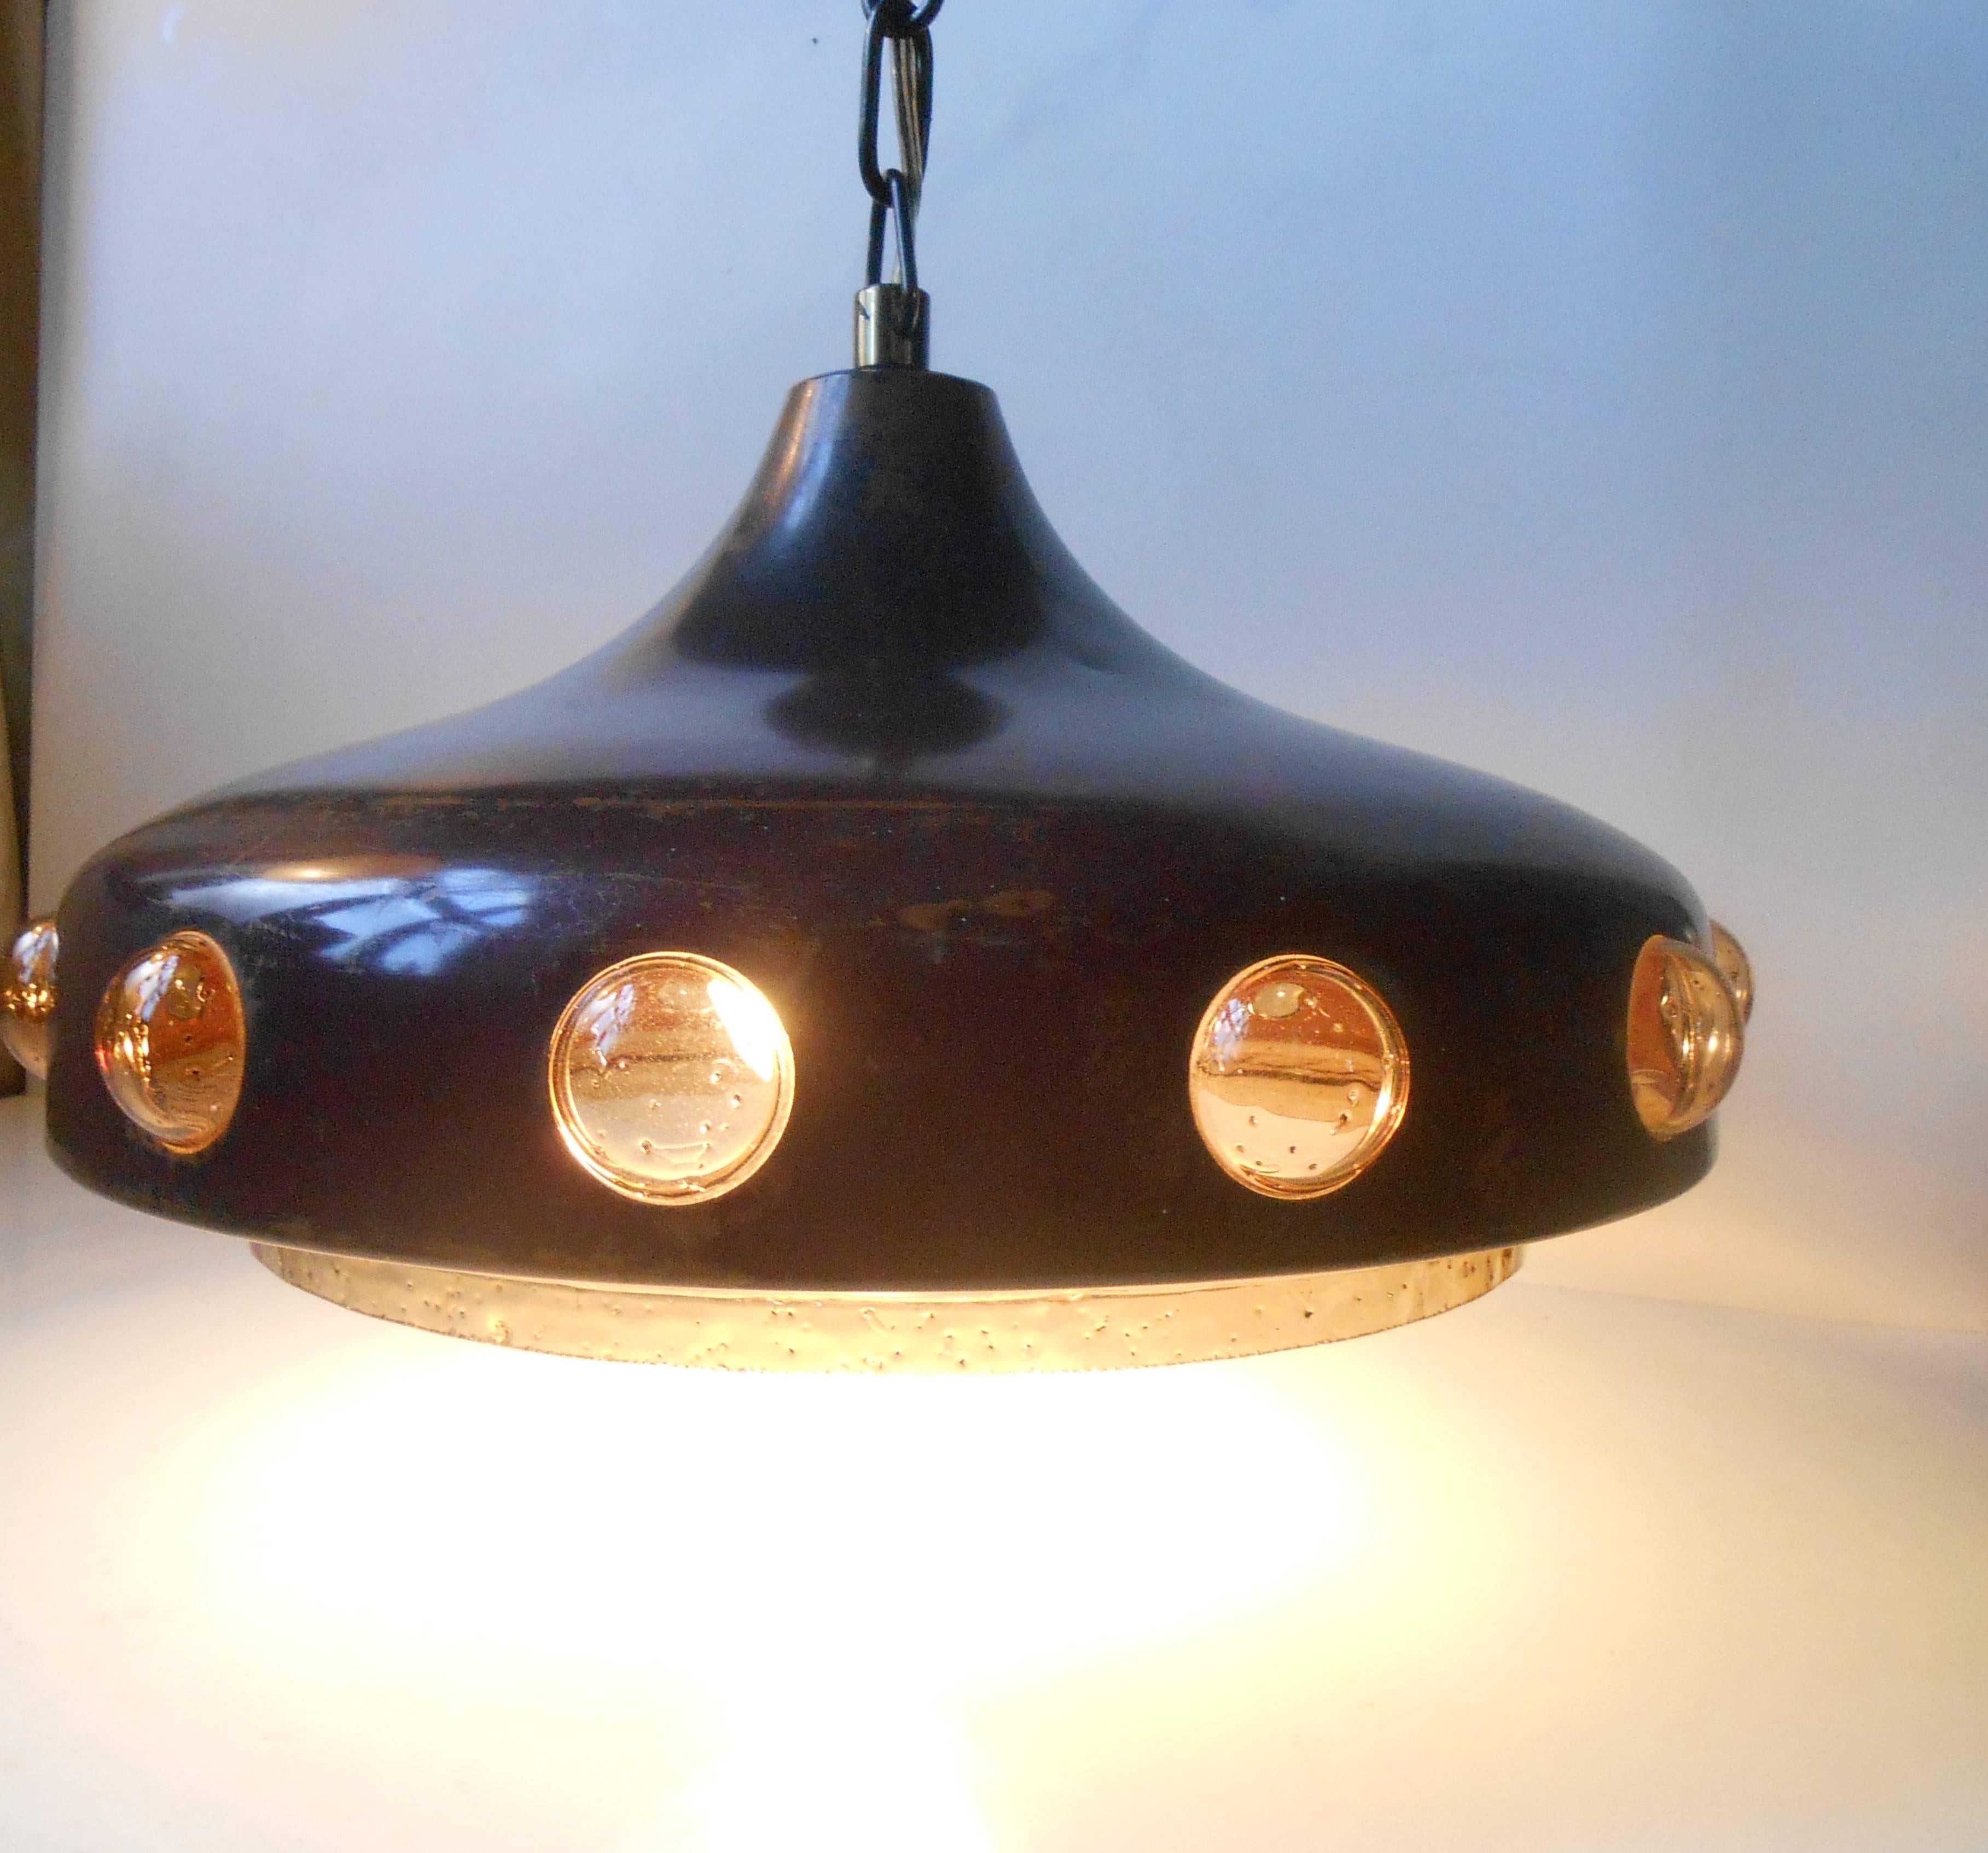 Late 20th Century Chain-Suspended Copper and Glass Pendant Lamp by Nanny Still for RAAK Amsterdam